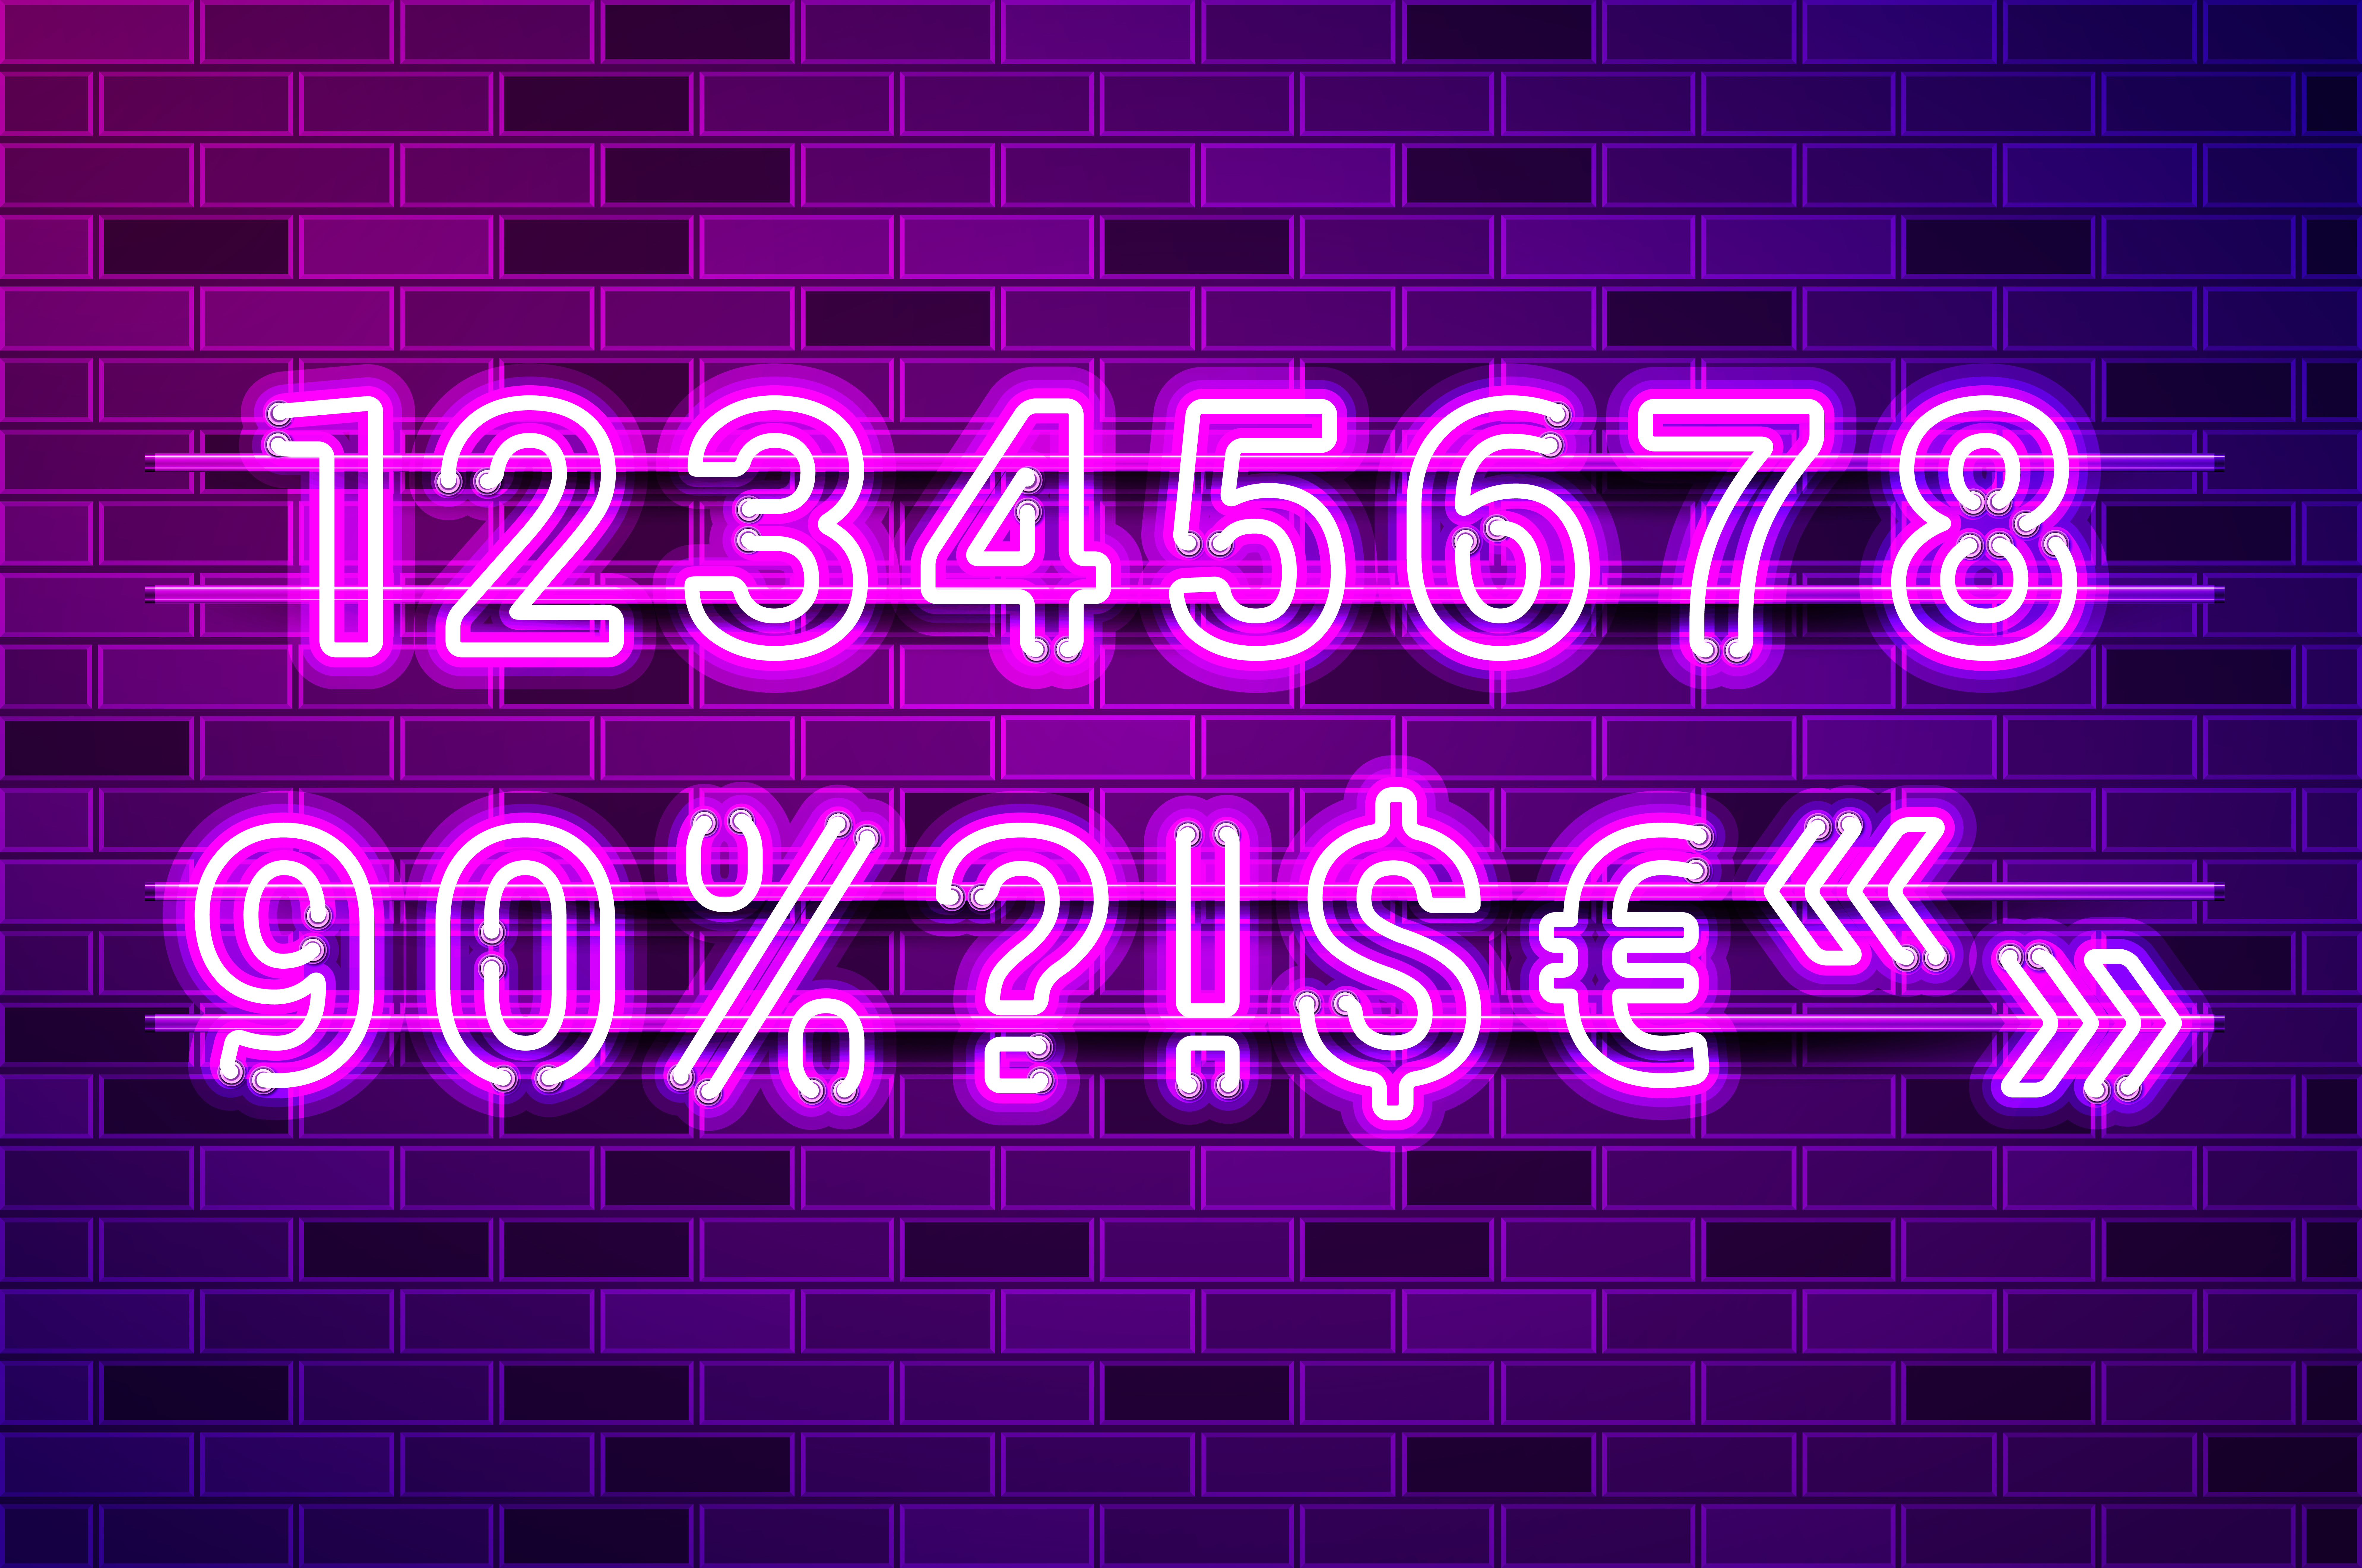 Glowing purple neon lamp numbers and special characters. Realistic vector illustration. Purple brick wall, violet glow, metal holders.. Glowing purple neon lamp numbers and special characters